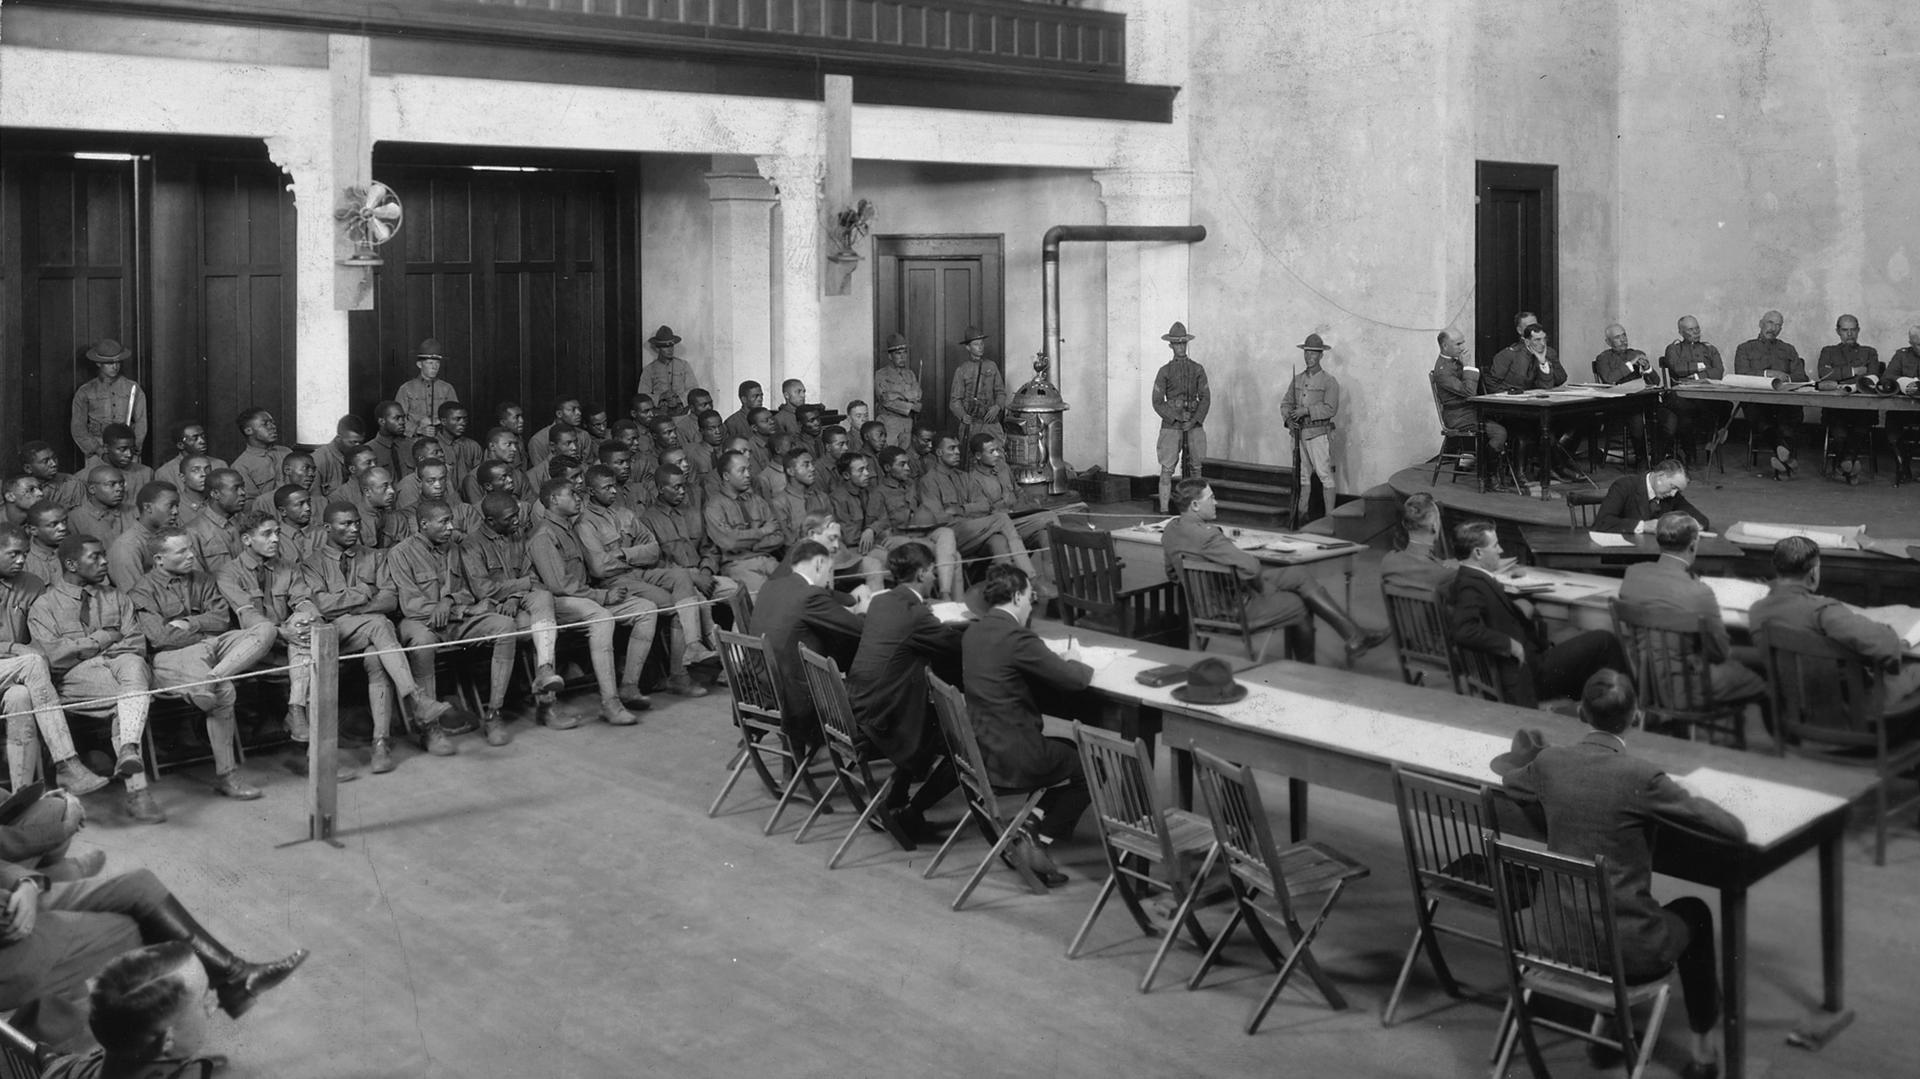 Sixty-four soldiers from the 3rd Battalion of the 24th United States Infantry, a predominantly black unit, were tried in the largest court martial in US military history over their roles in the Camp Logan riot. Thirteen were sentenced to death.